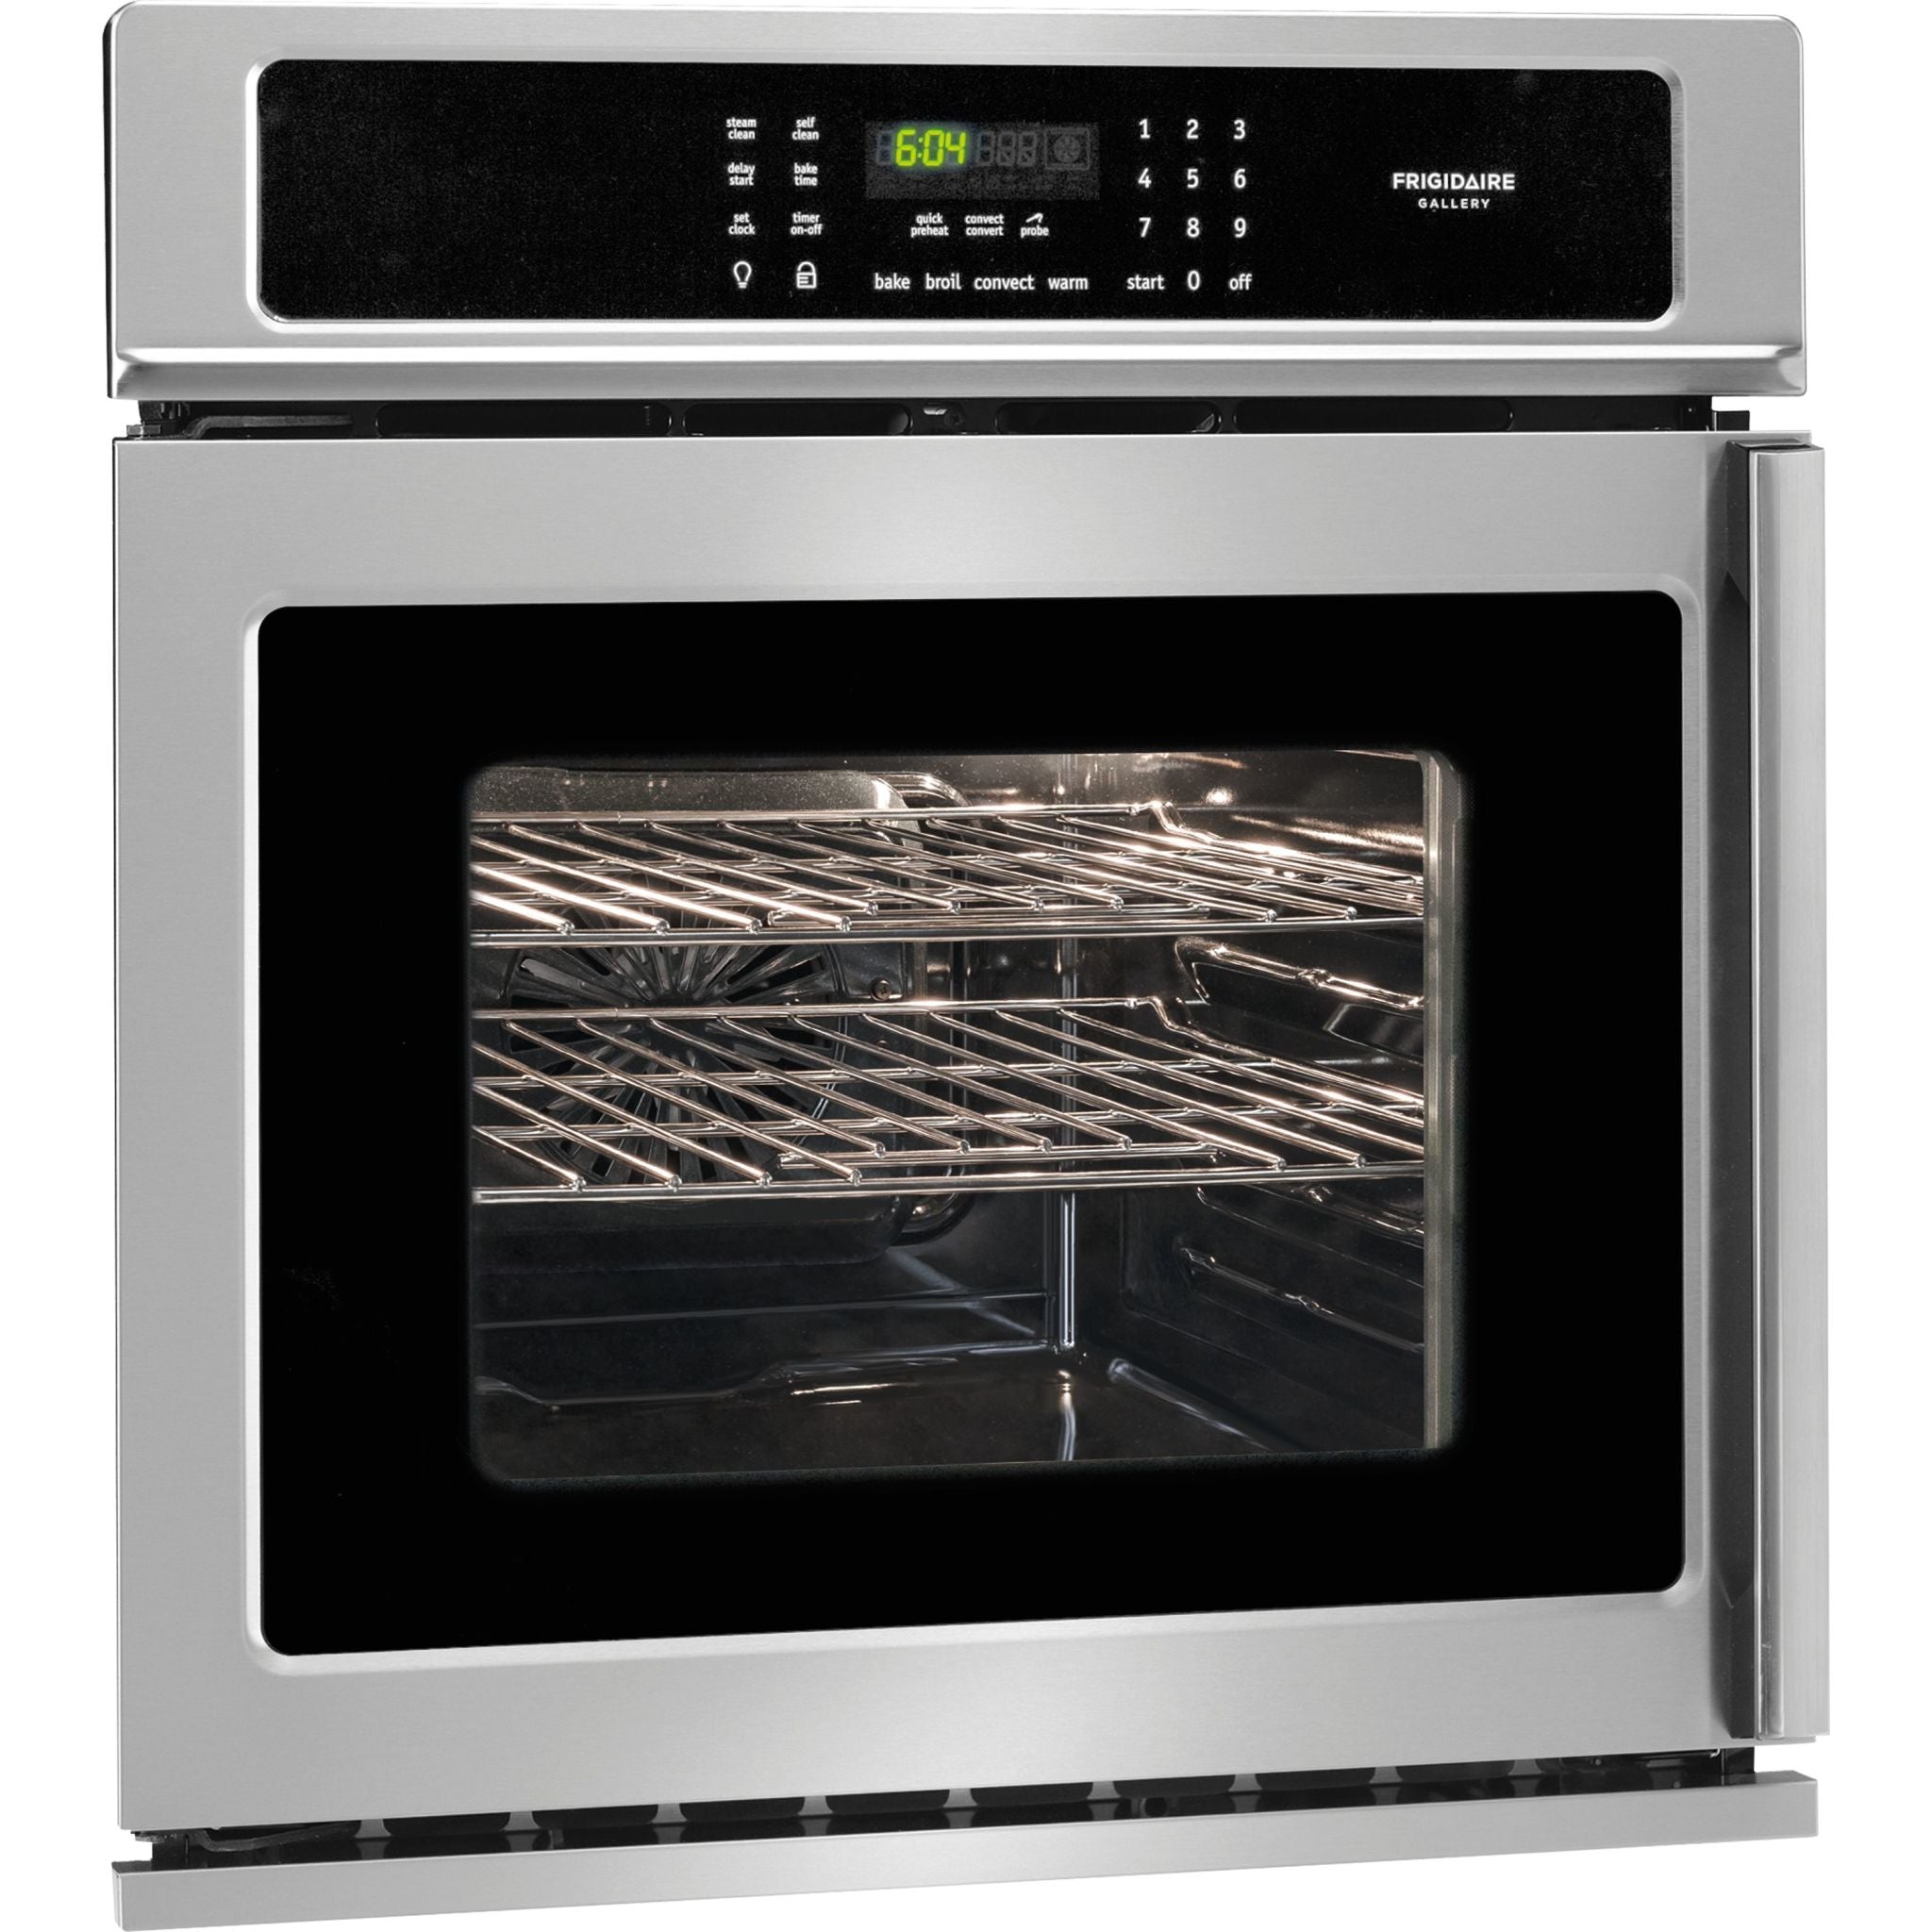 Frigidaire Gallery, Frigidaire Gallery 27" Easy Clean Wall Oven (FGEW276SPF) - Stainless Steel